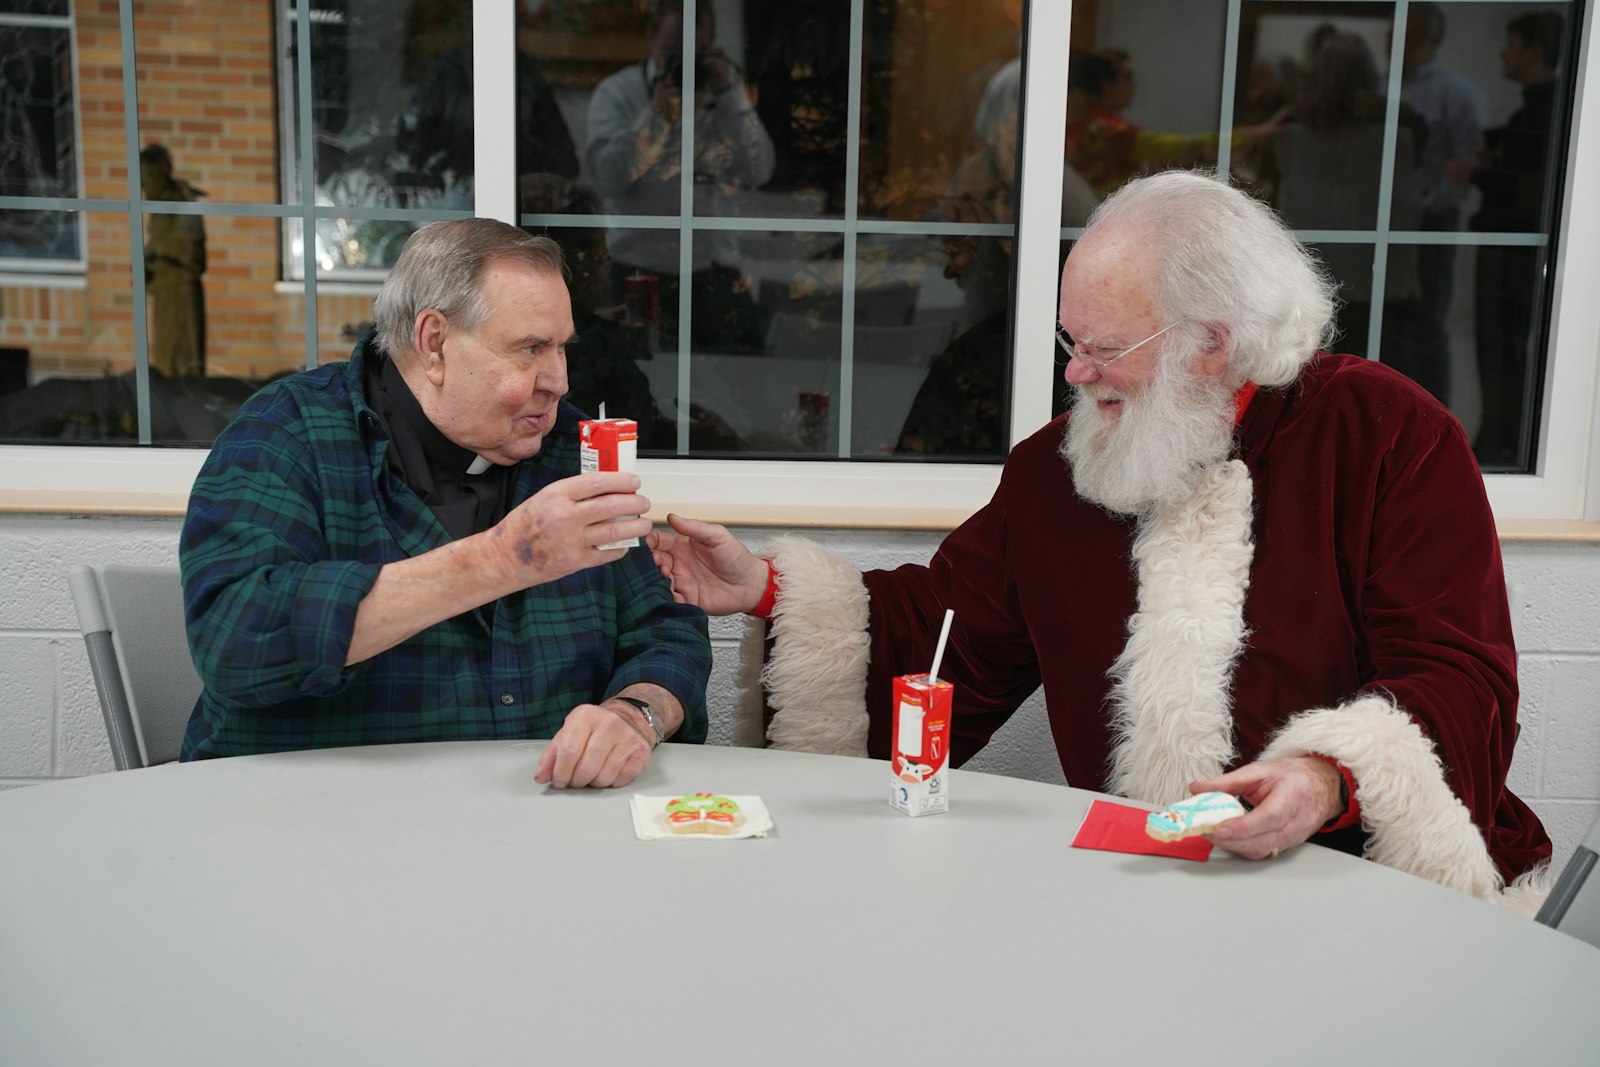 Fr. Terry Kerner, pastor of St. Kateri Parish, shares some milk and cookies with Santa Claus following during a surprise visit to St. Kateri on Jan. 22.